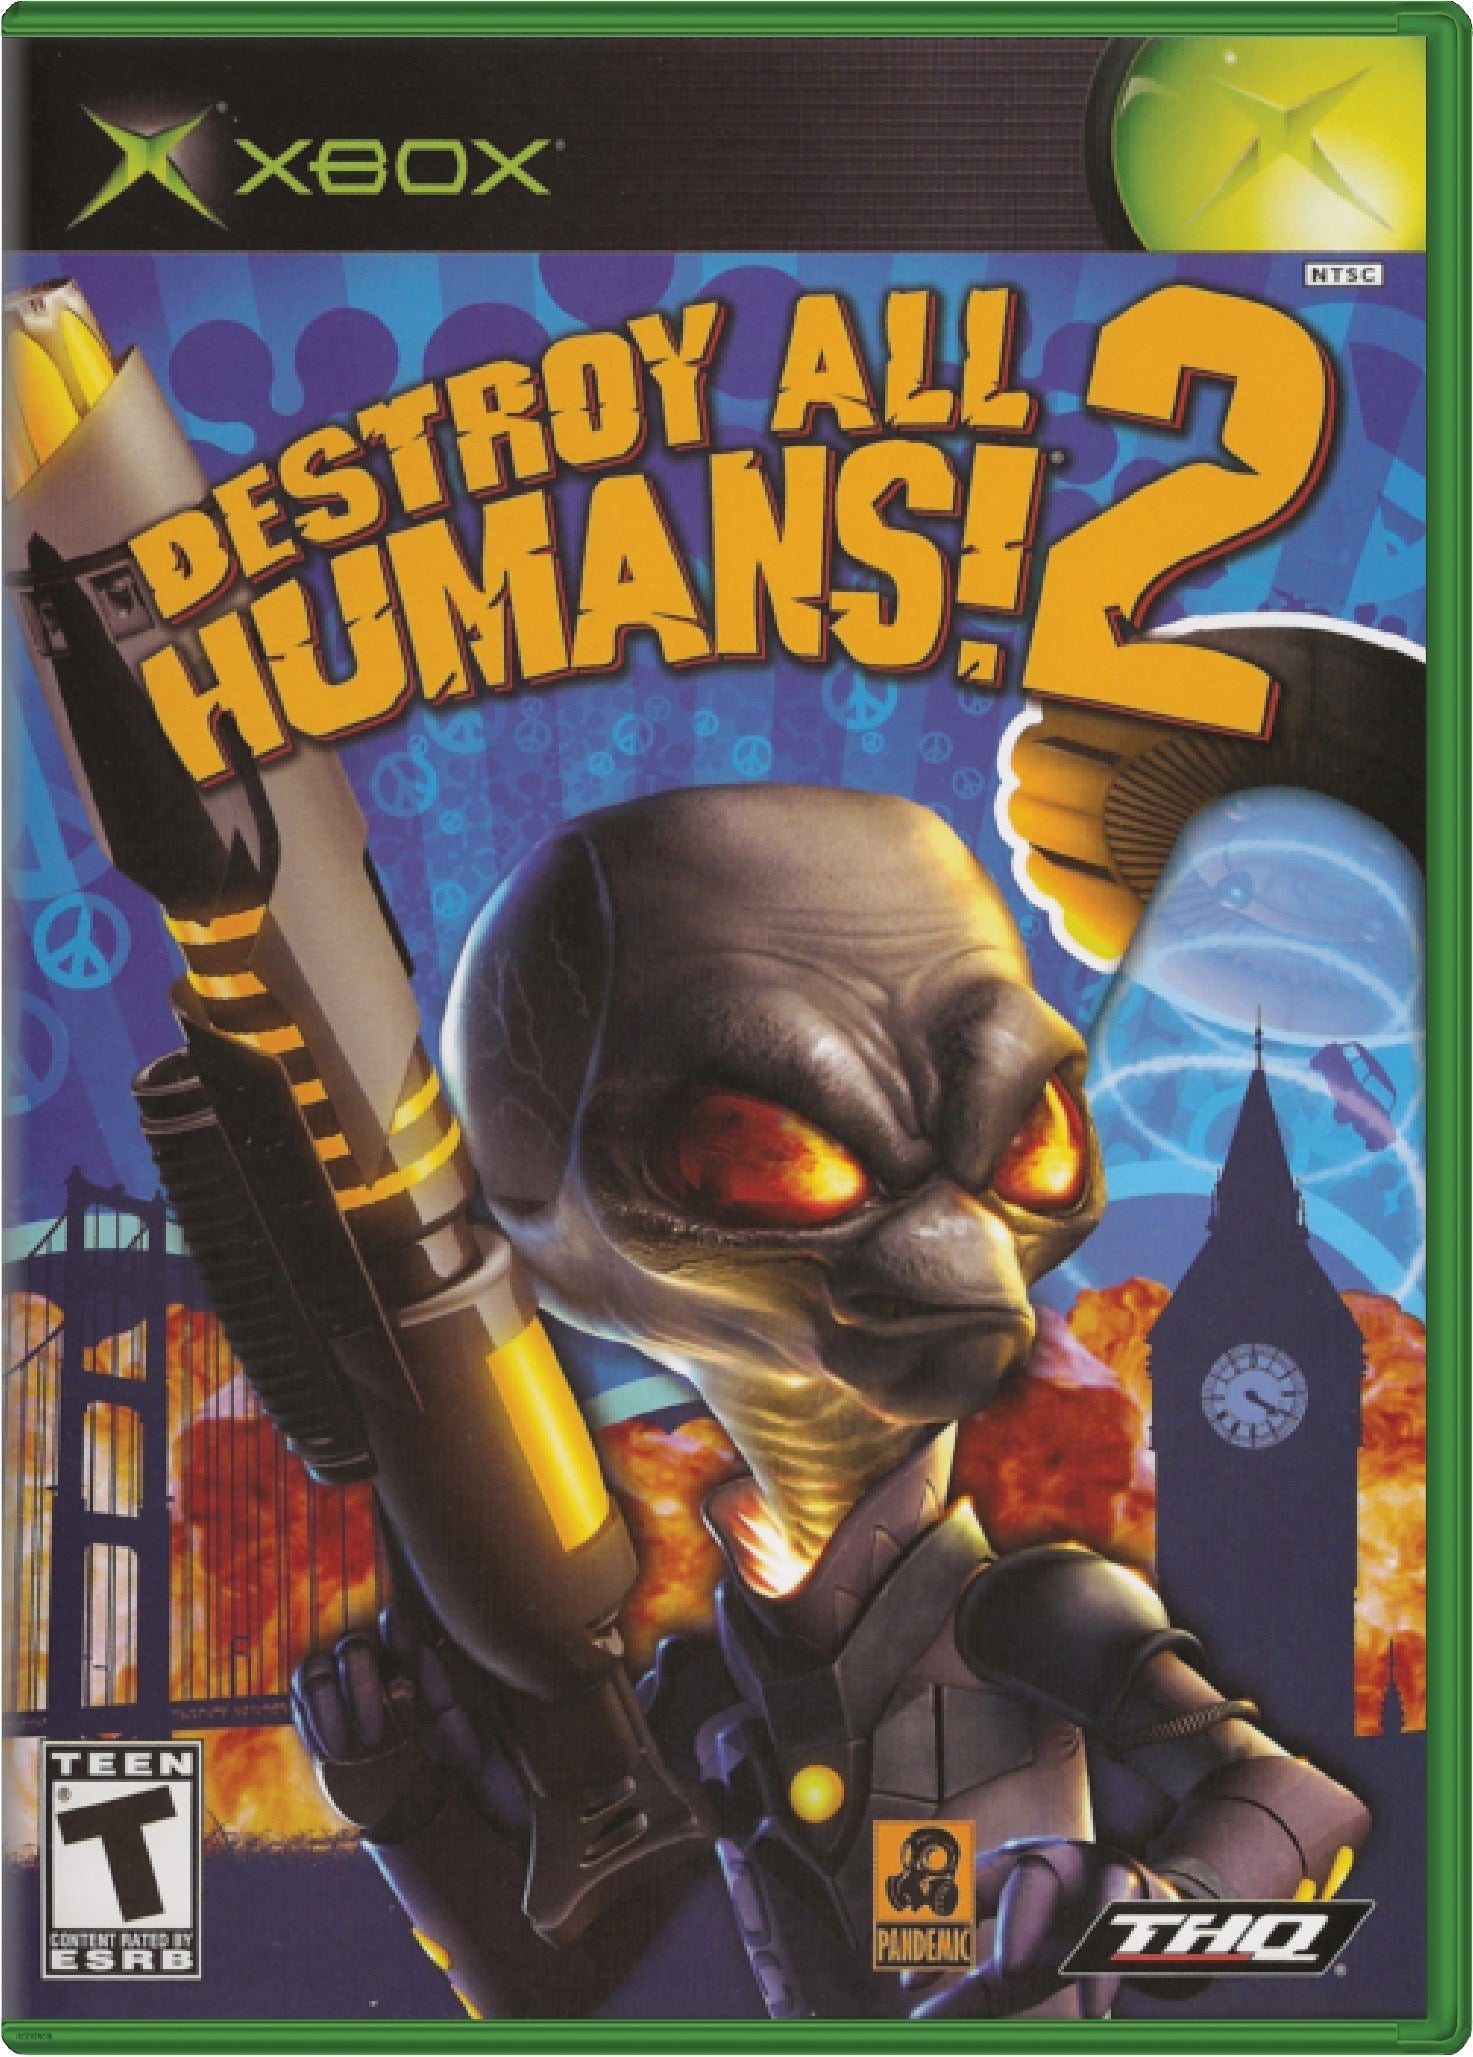 Destroy All Humans 2 Cover Art